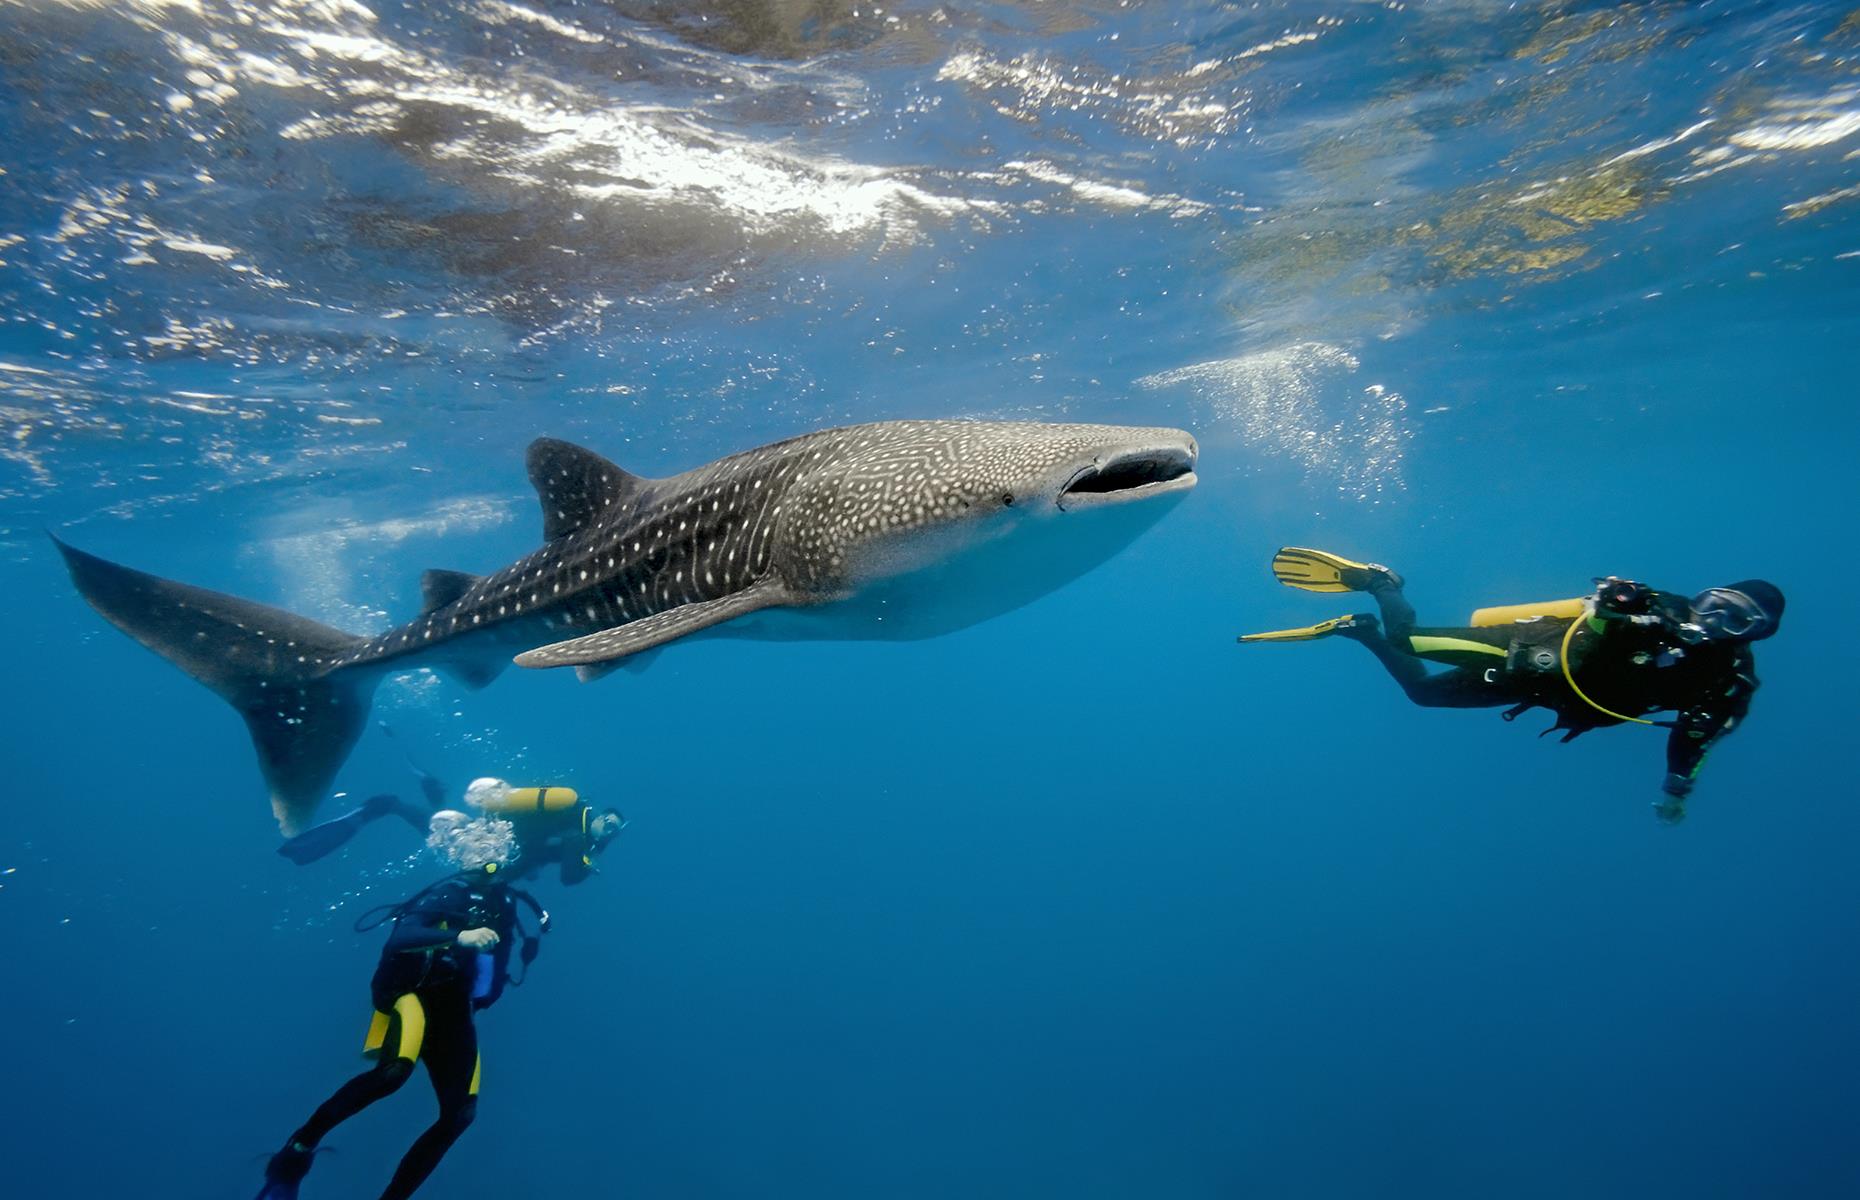 The thrill of swimming alongside the biggest fish on the planet can’t be beaten. From mid-March to mid-August, whale sharks head to Ningaloo on the Western Australian coast for the coral spawning season. That’s your chance to take a dip with these gentle giants, which can grow close to 60 feet (18.2m) long. They pose no threat to humans, so dive in and share the staggering sights of Australia’s largest fringing reef.